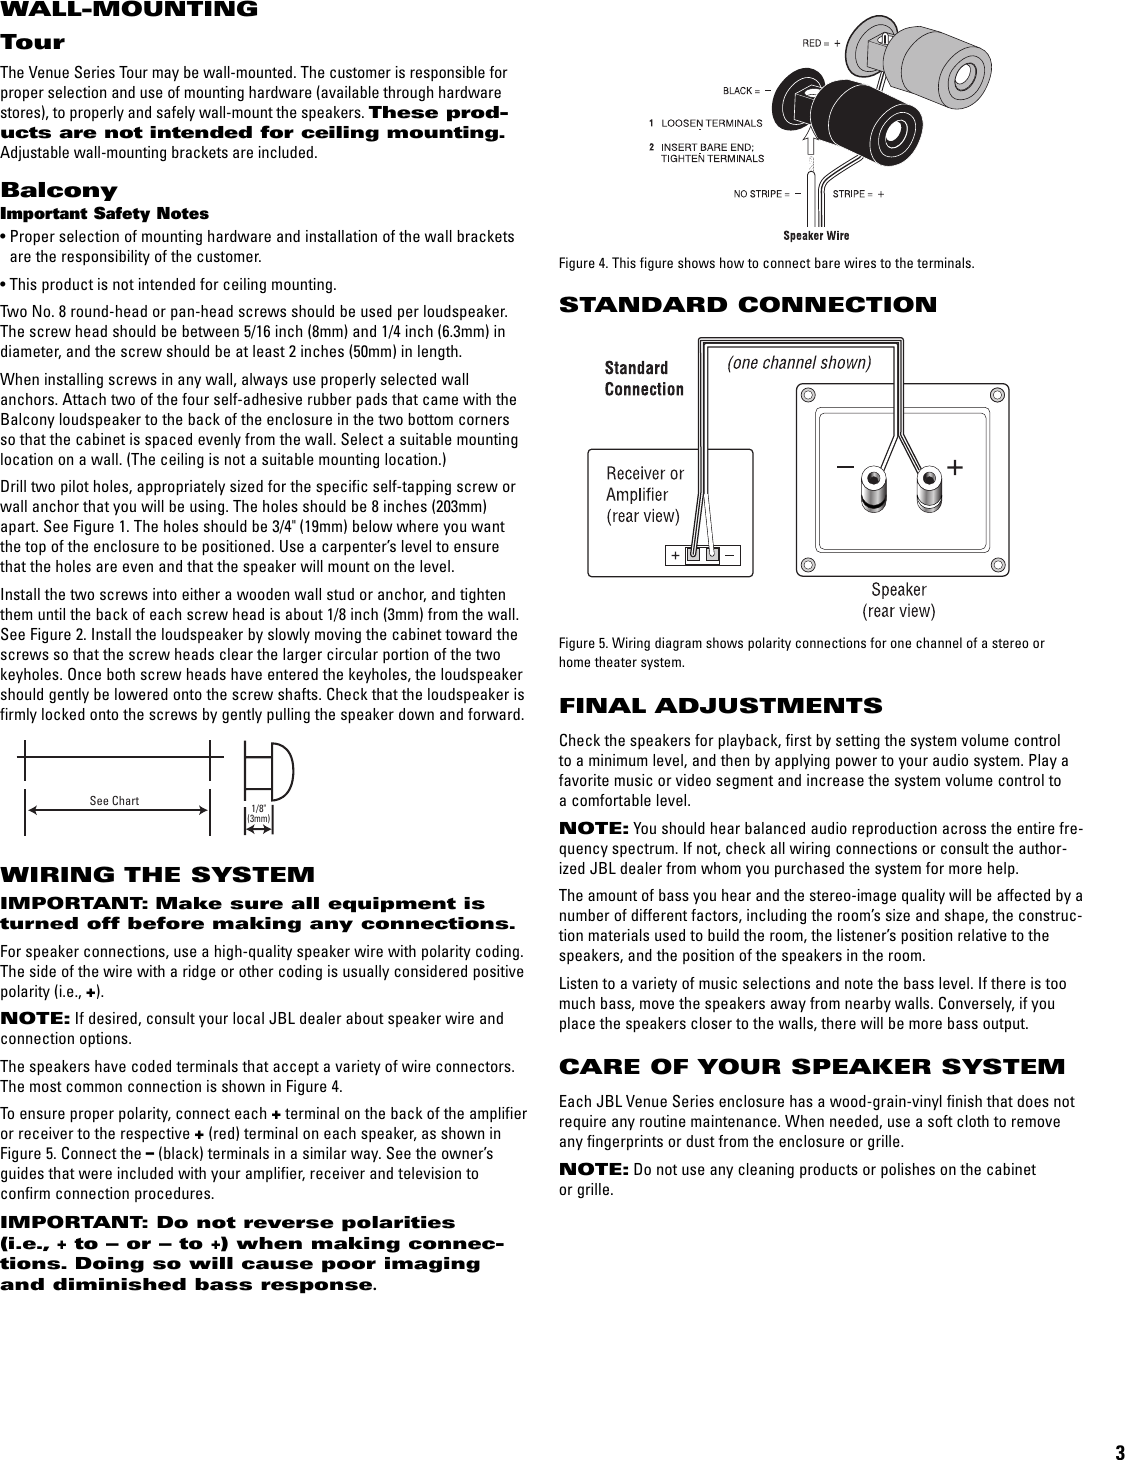 Page 3 of 4 - Bose Speakers Venue Series OM User Manual  To The B595ee75-ed94-438e-8fa3-88975d95f668